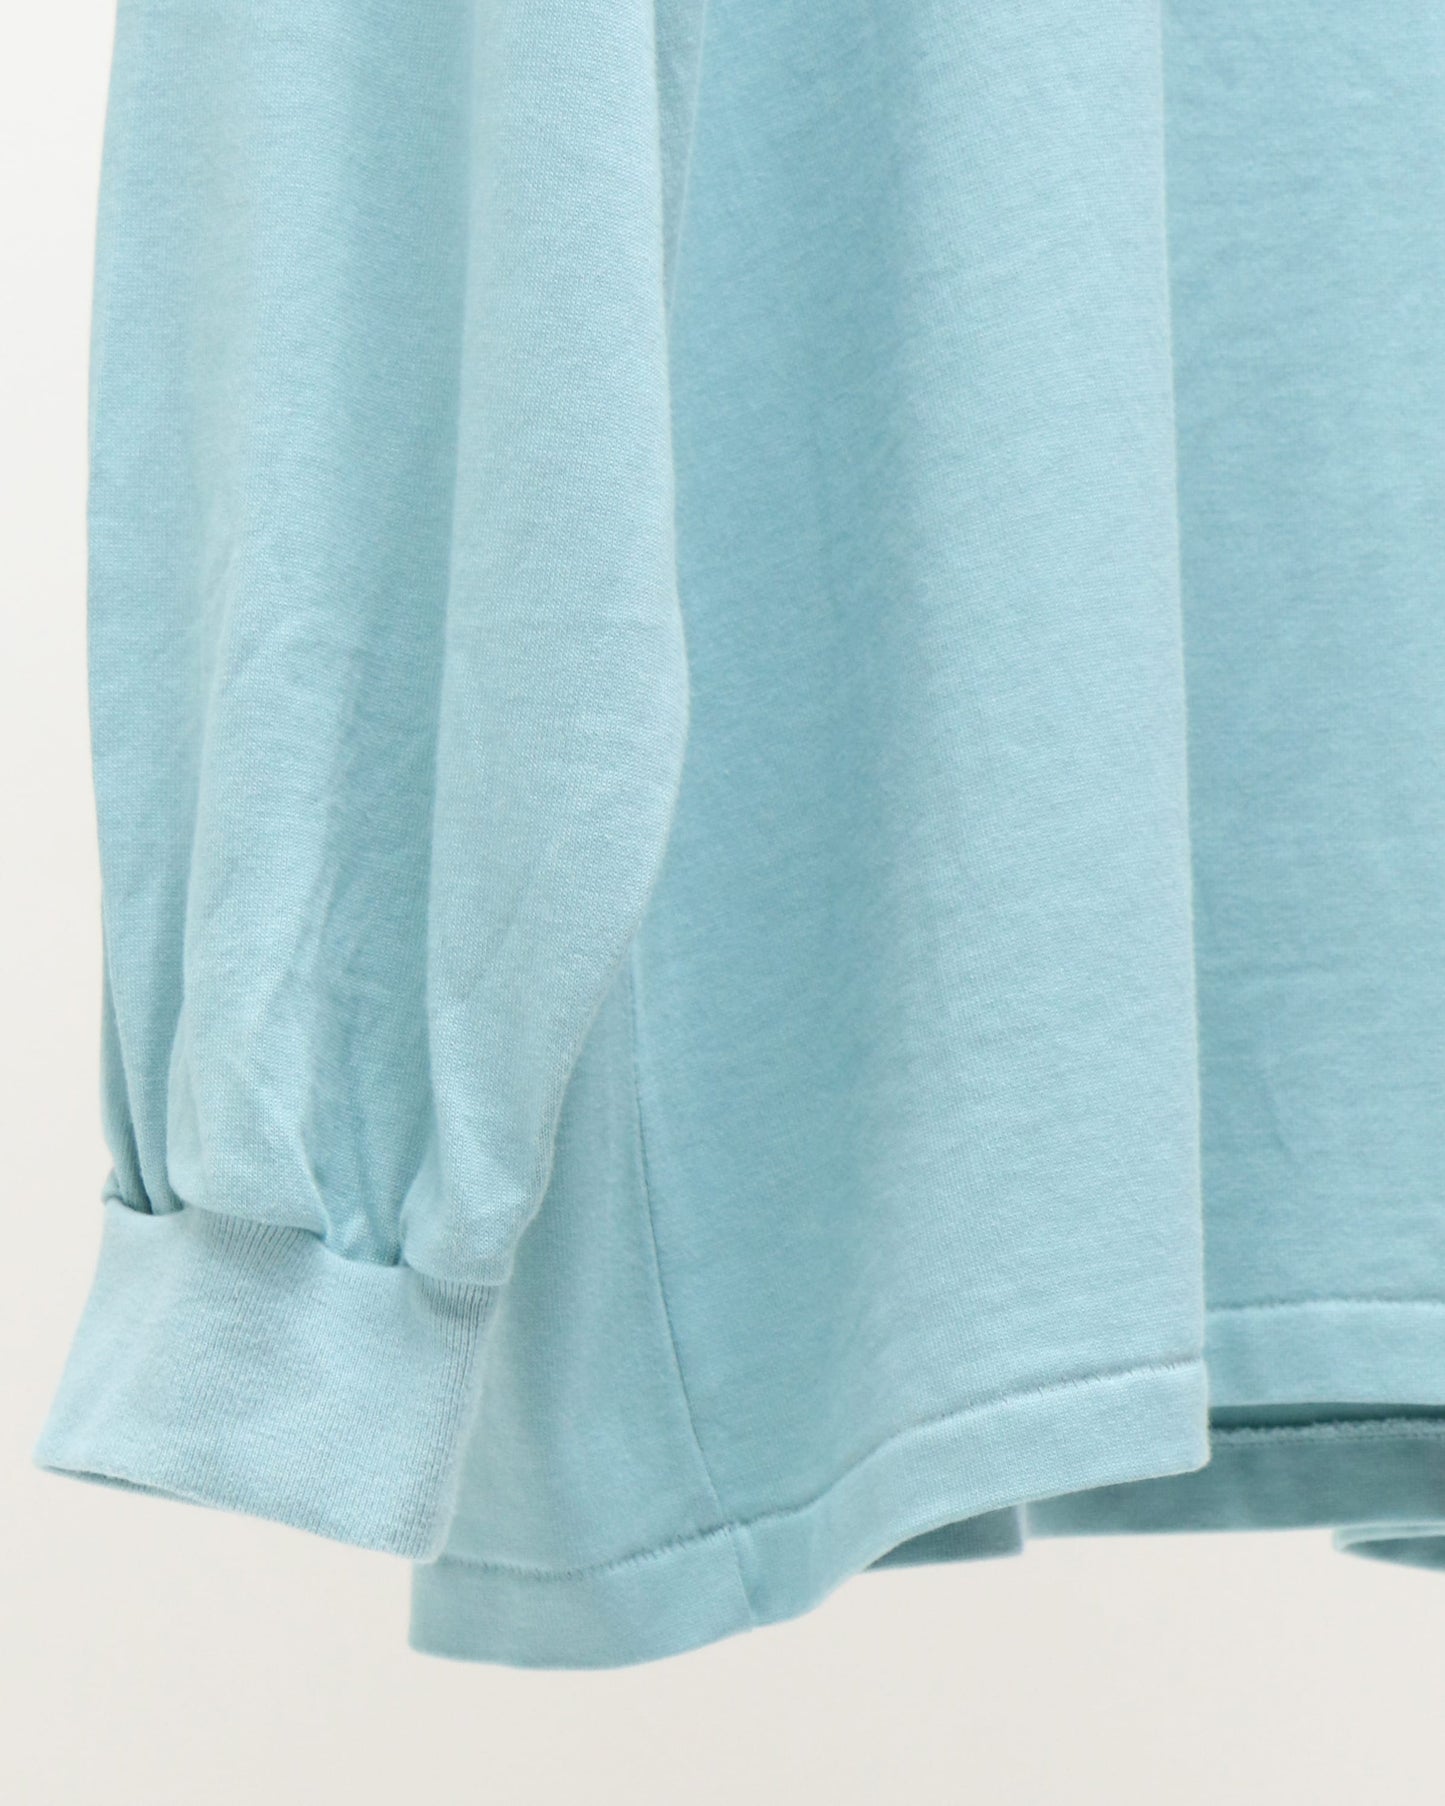 LUSTER PLATING L/S TEE TURQUOIS BLUE